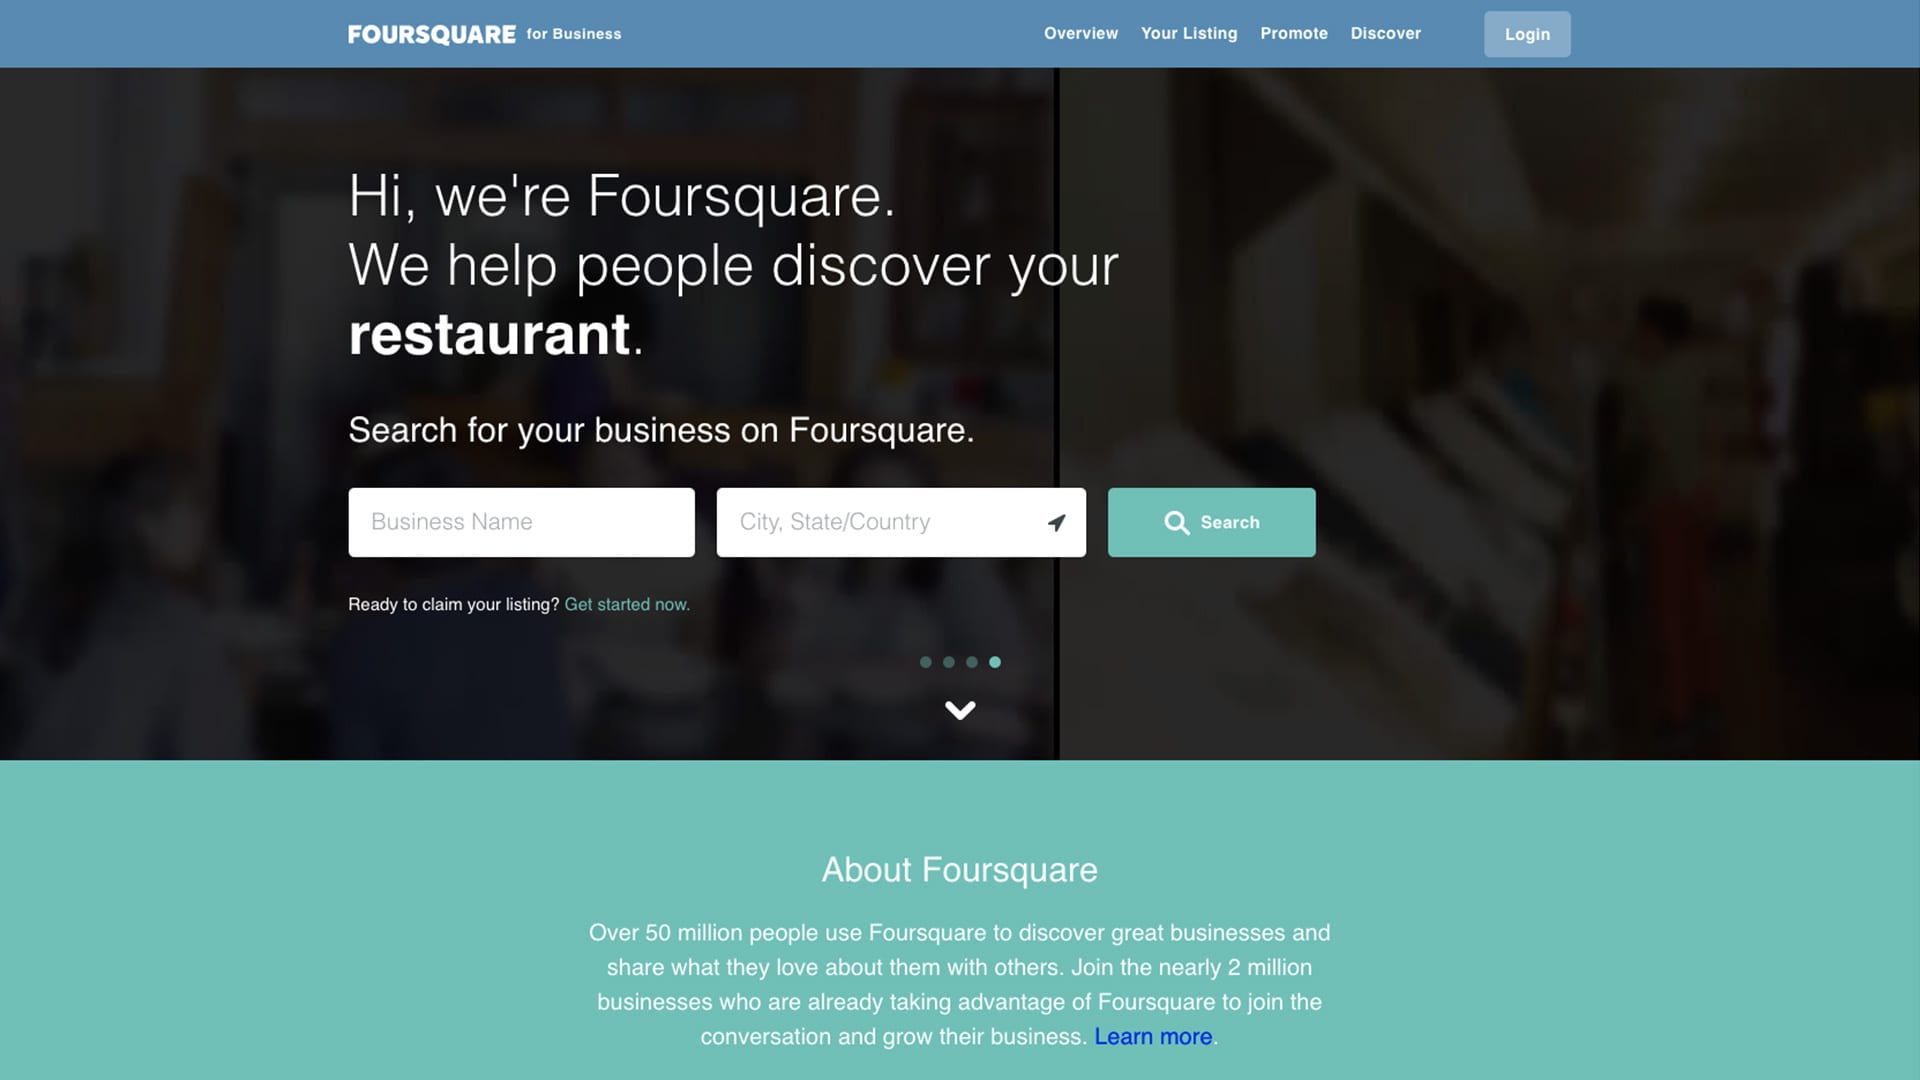 Marketing with Foursqaure